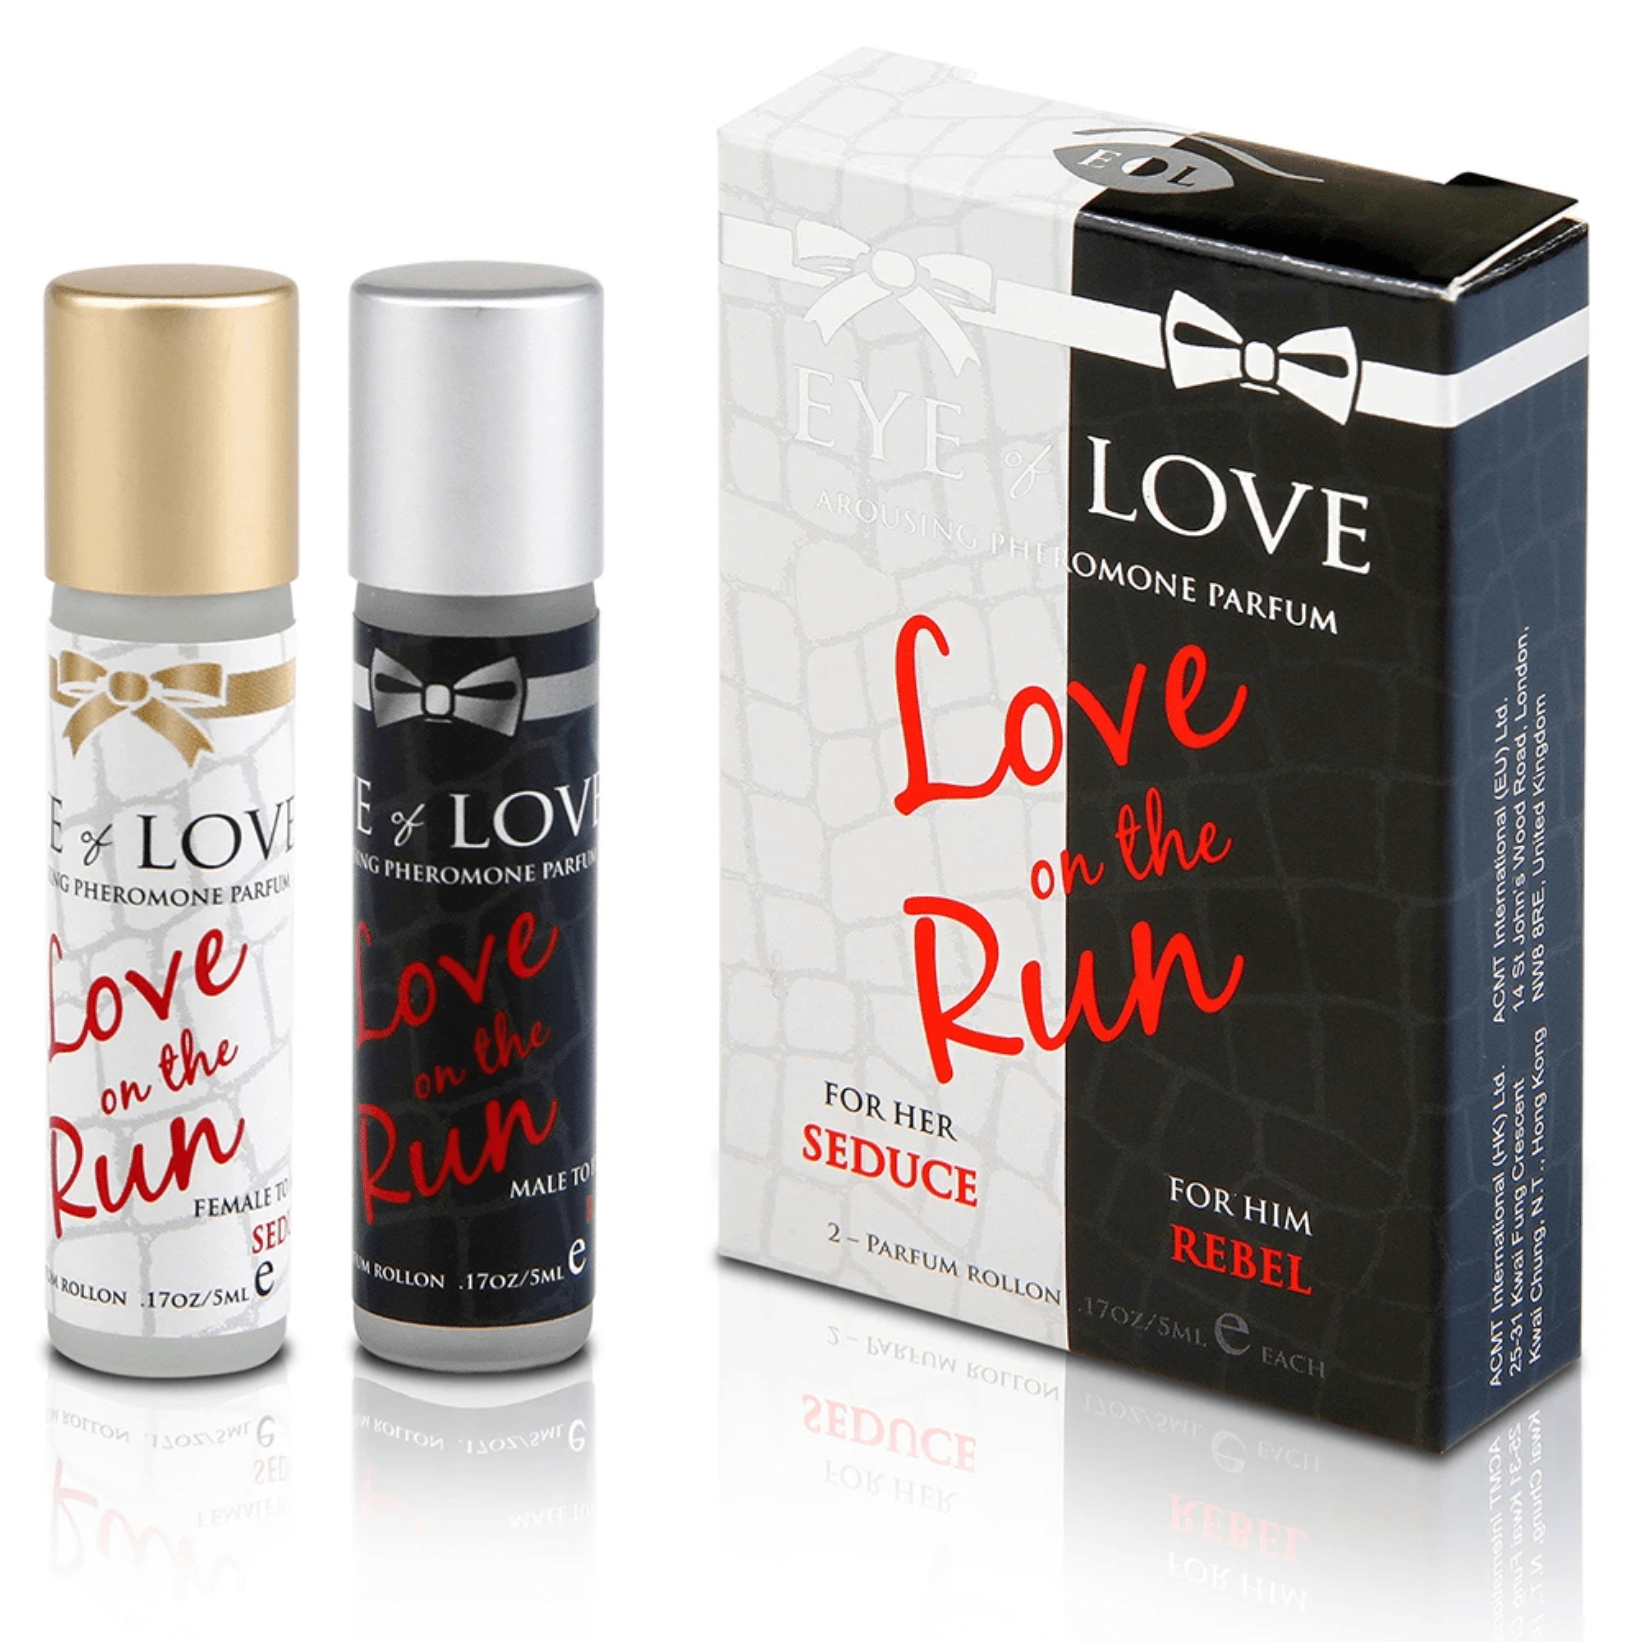 Great Gift Guide - Eye of Love